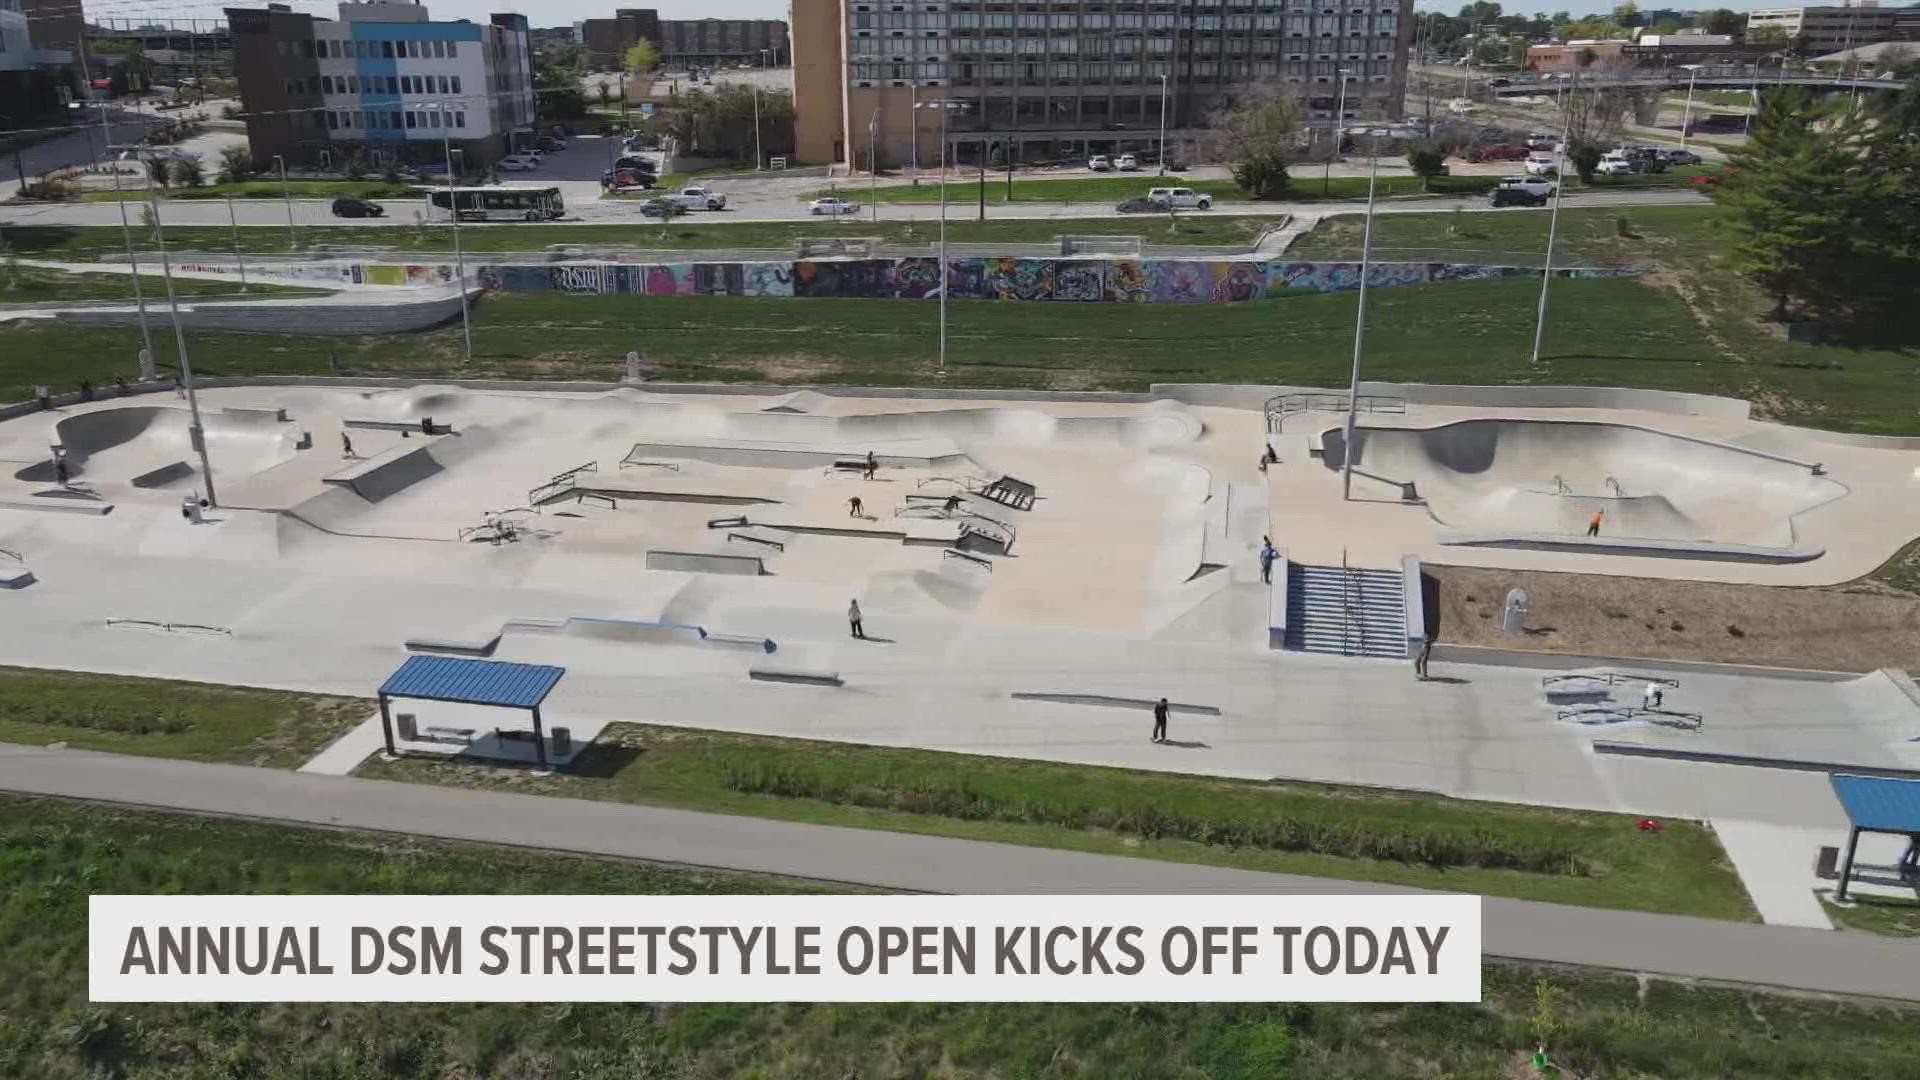 Skate DSM wanted to make sure Des Moines had an event just as special as the Copenhagen Open, which is regarded as the best international skate competition.